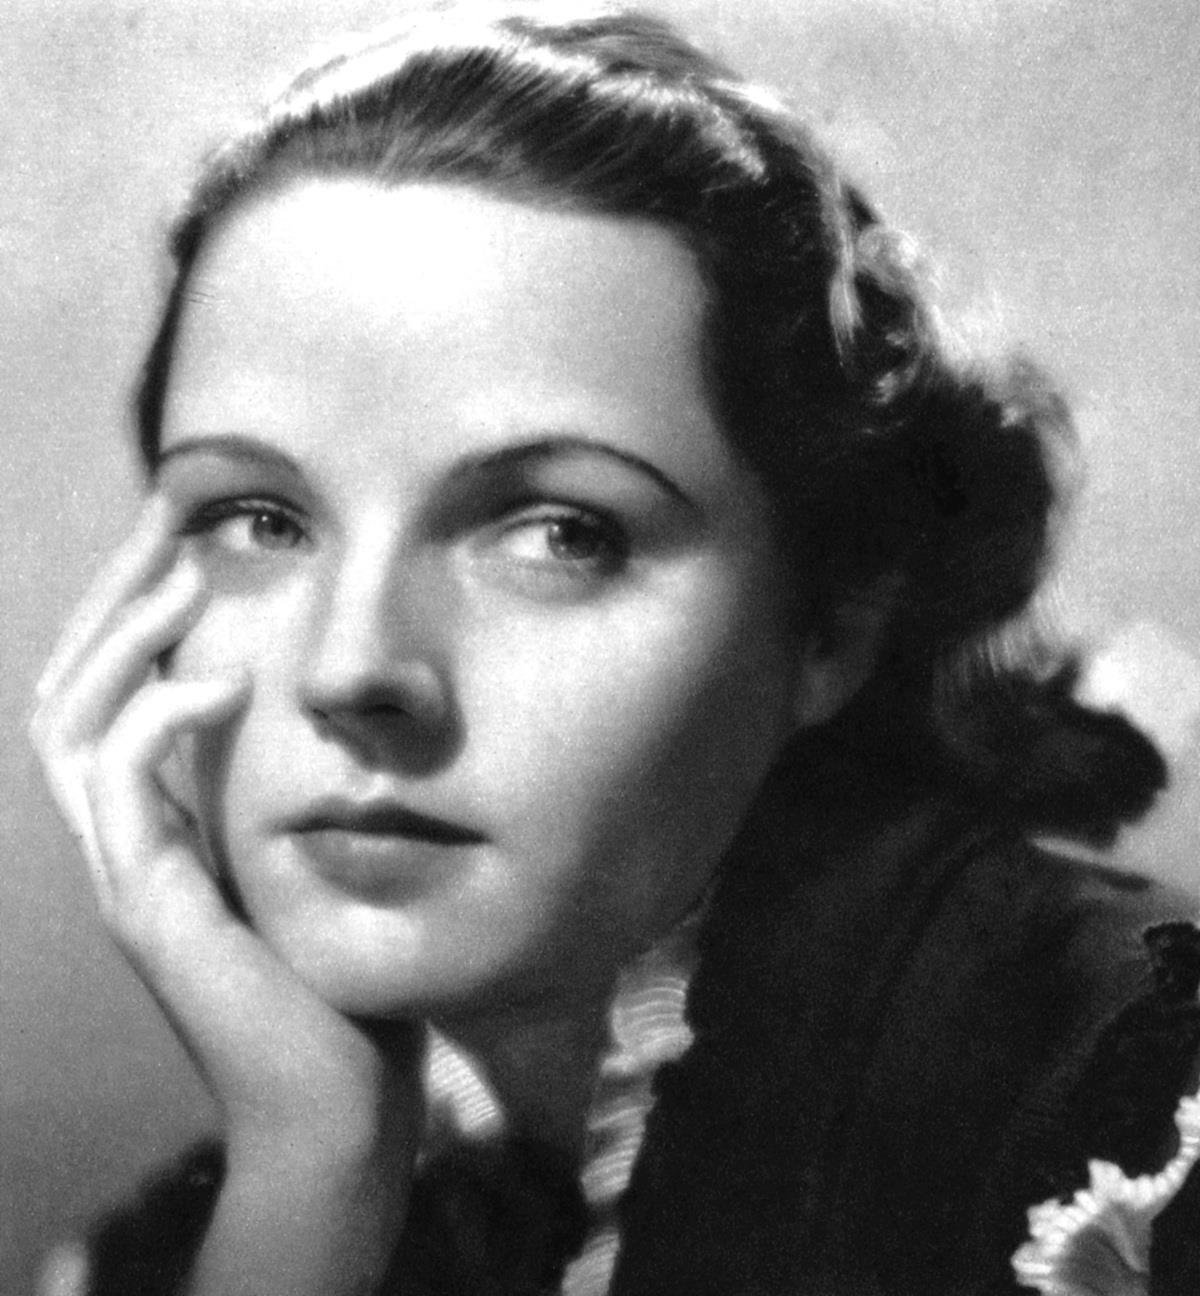 <p>Jane Wyatt, who played Margaret Anderson, didn't start her acting career on TV. Her first job was on Broadway, as an understudy for actress Rose Hobart. Wyatt received favorable reviews for her understated beauty. Eventually, she transitioned to Universal Pictures. </p> <p>In 1934, Wyatt debuted in her first TV role in <i>One More River. </i>Three years later, she acted in Frank Capra's<i> Lost Horizon. </i>Before Wyatt joined the show Father Knows Best in 1954, she performed in <i>None but the Lonely Heart, Gentleman's Agreement, Boomerang, Task Force</i>, and <i>House by the River</i>.</p>